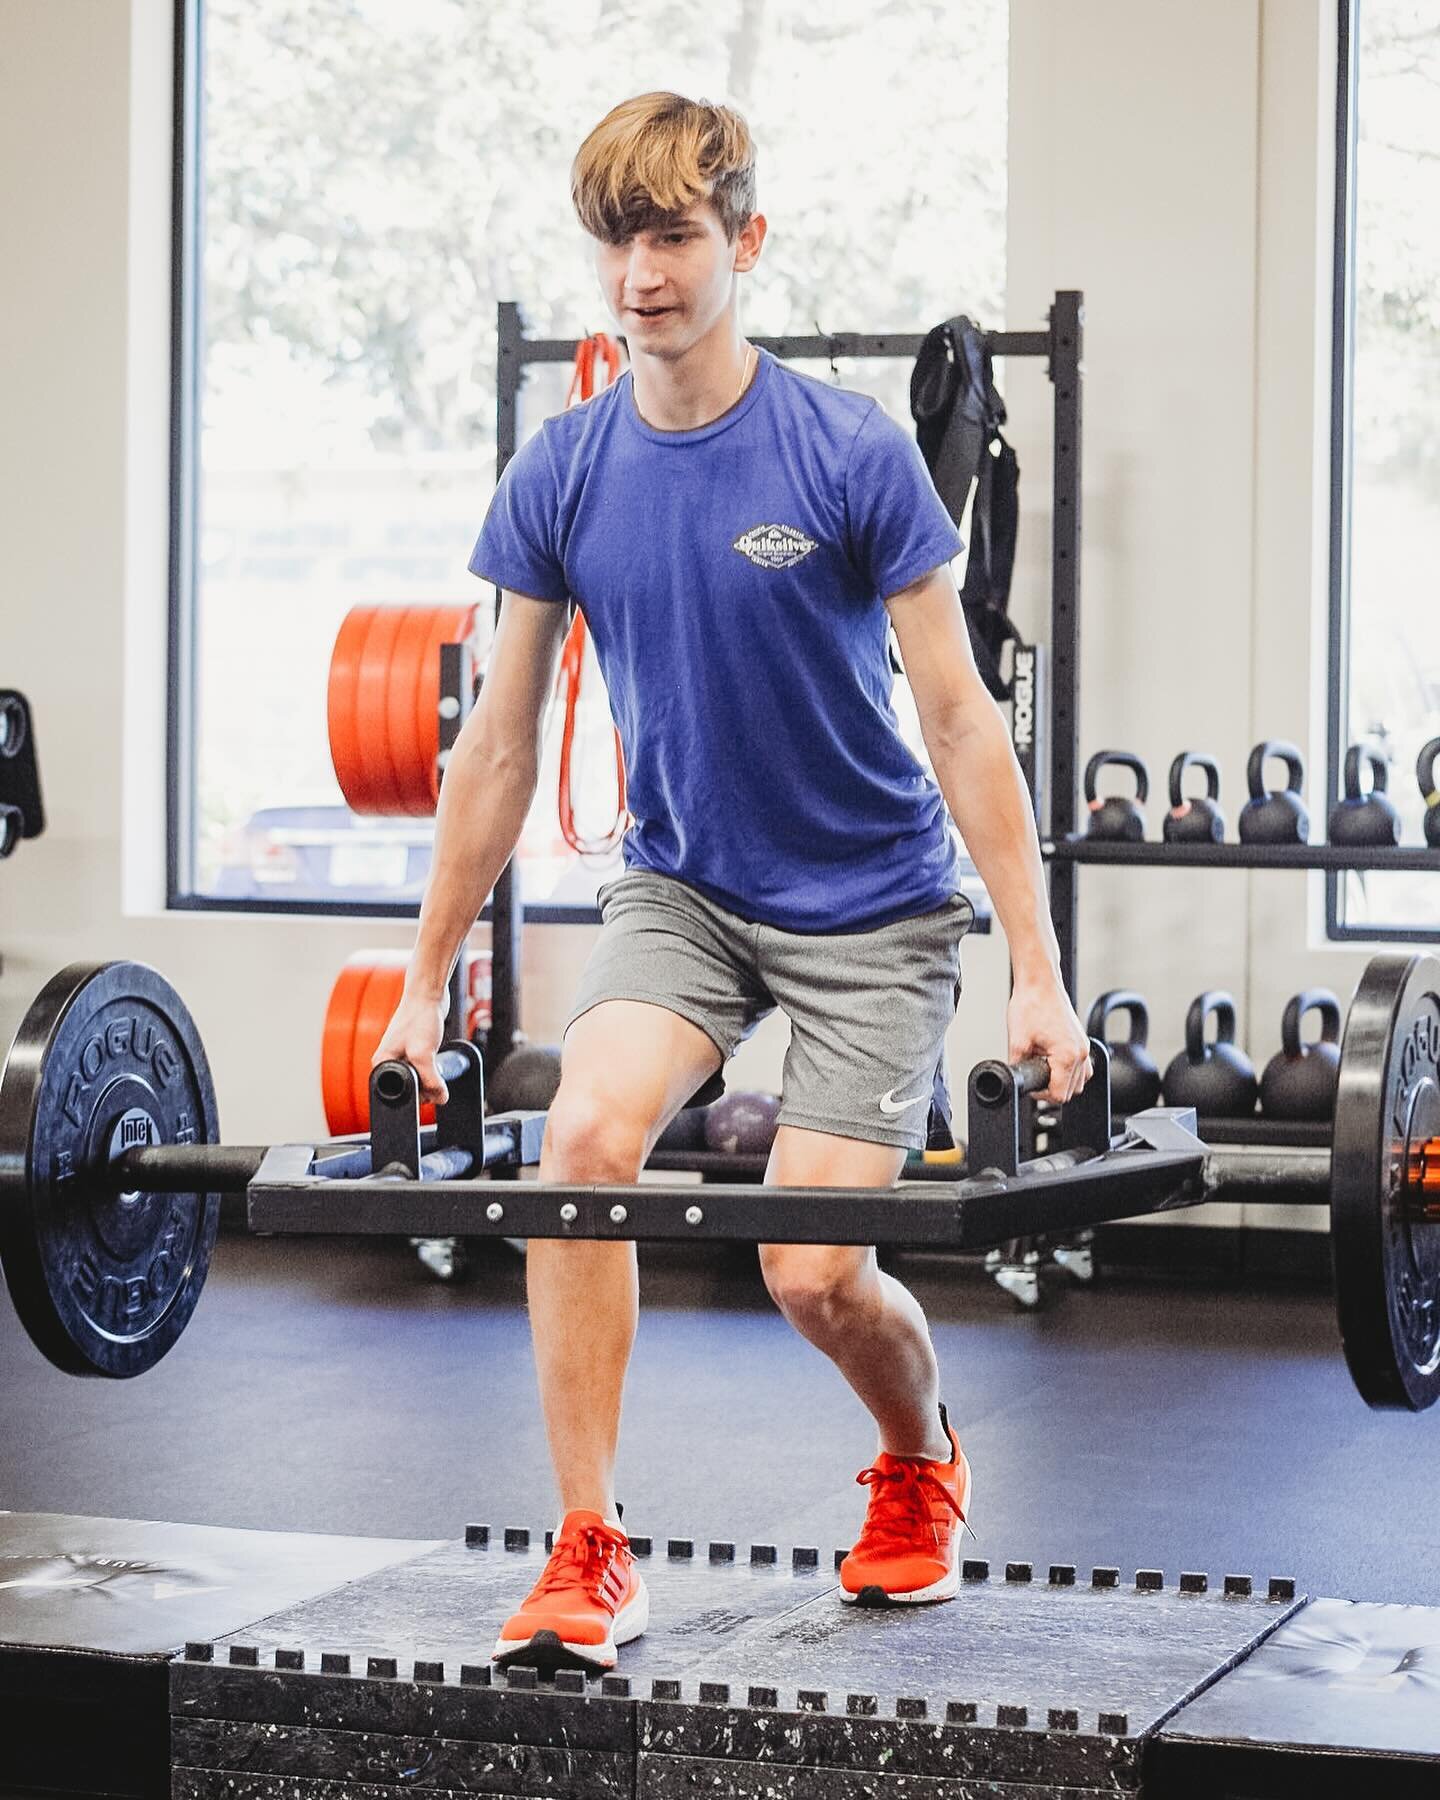 Cooper has participated in our performance program since August. In his first 3 months he jumped:
	- Gained 10 pounds
	- Back Squat increased from 185 to 305 lbs
	- Vertical Jump up 3 inches
	- 10 yd dash down to 1.5 seconds

#sportsperformance #spor